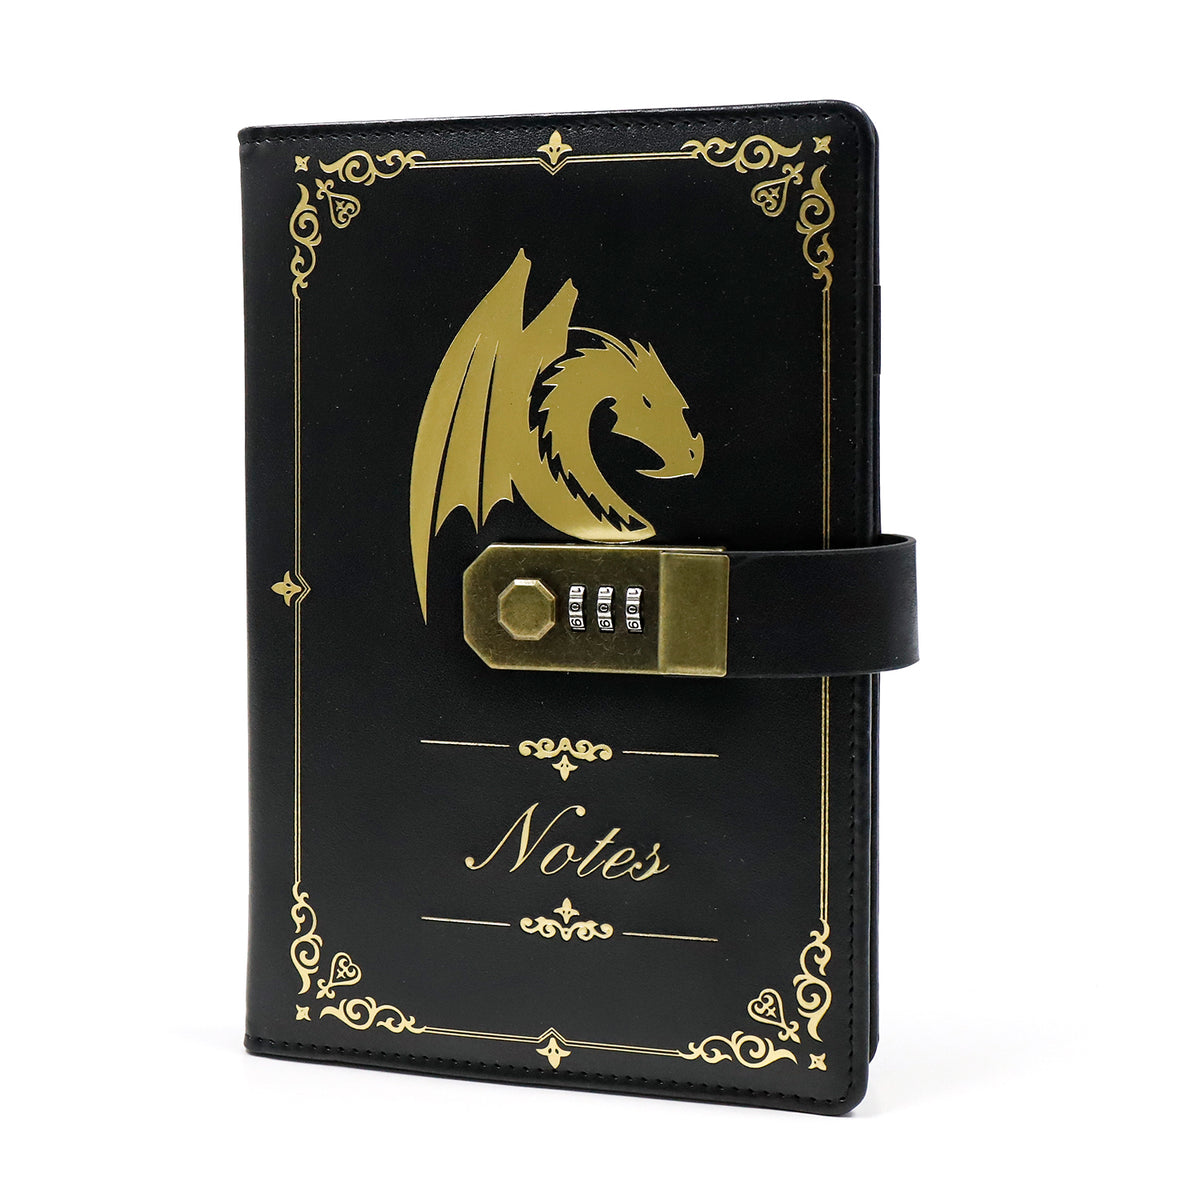 Dungeon Master A5 Vintage PU Leather Combination Lock Notebook (Black)